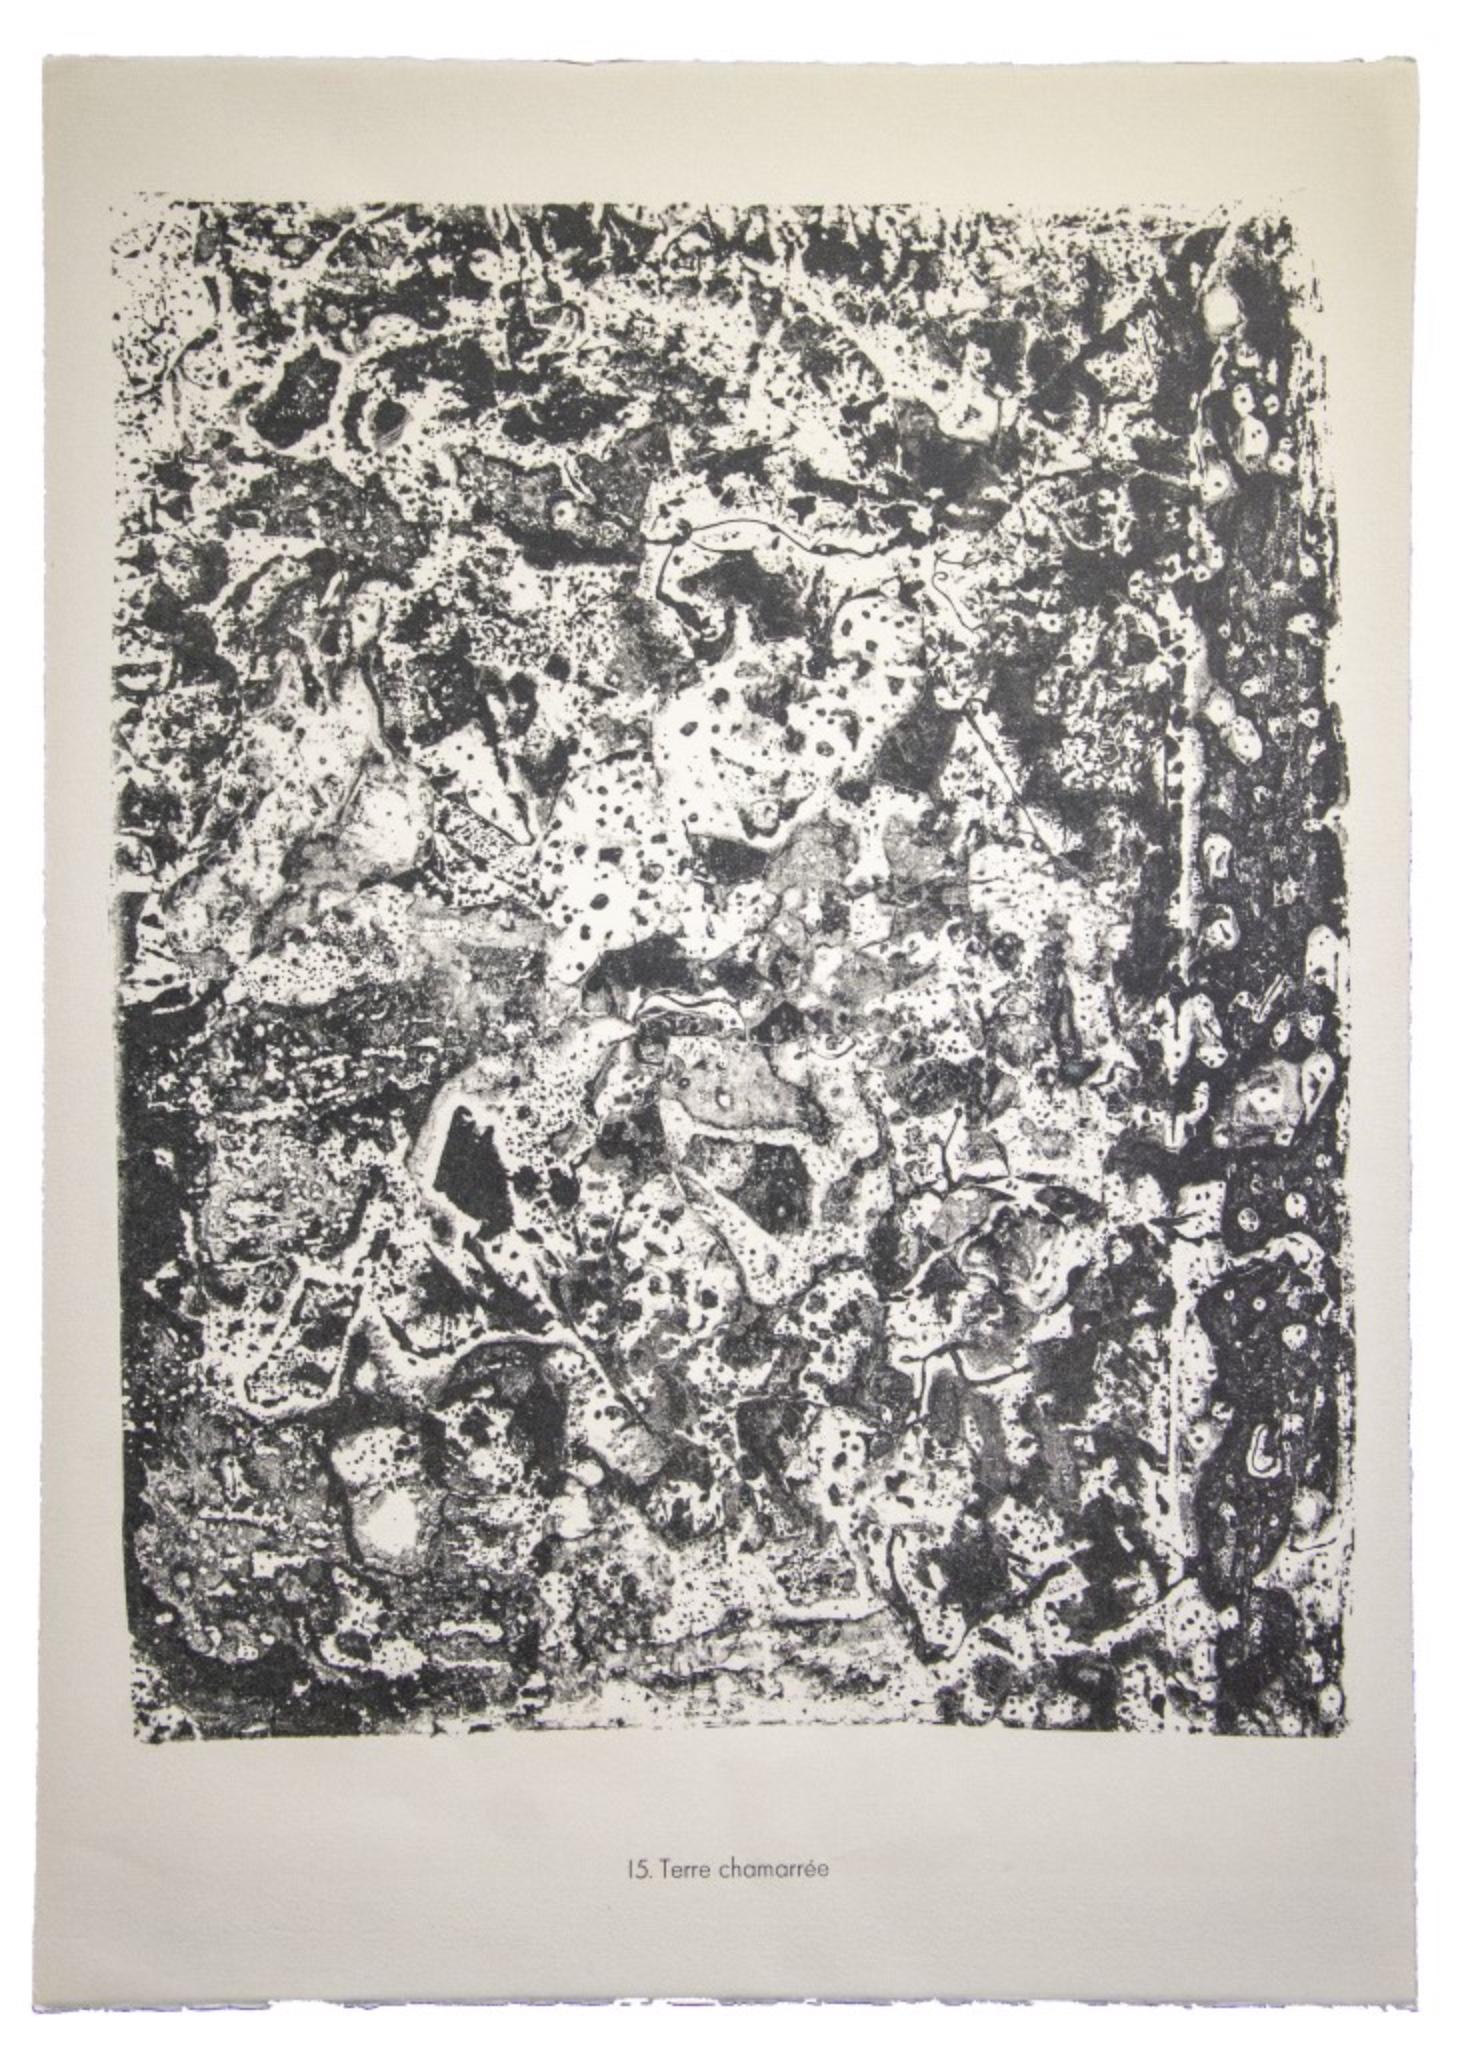 Terre Chamarree is an original lithograph. Abstract composition by the French artist Jean Dubuffet. From the album "Theatre du sol" (1953-1959). 

In very good conditions.

Reference: Cat. Silkeborg n° 338/ Cat. S. Webel n°541. 

Image Dimensions: